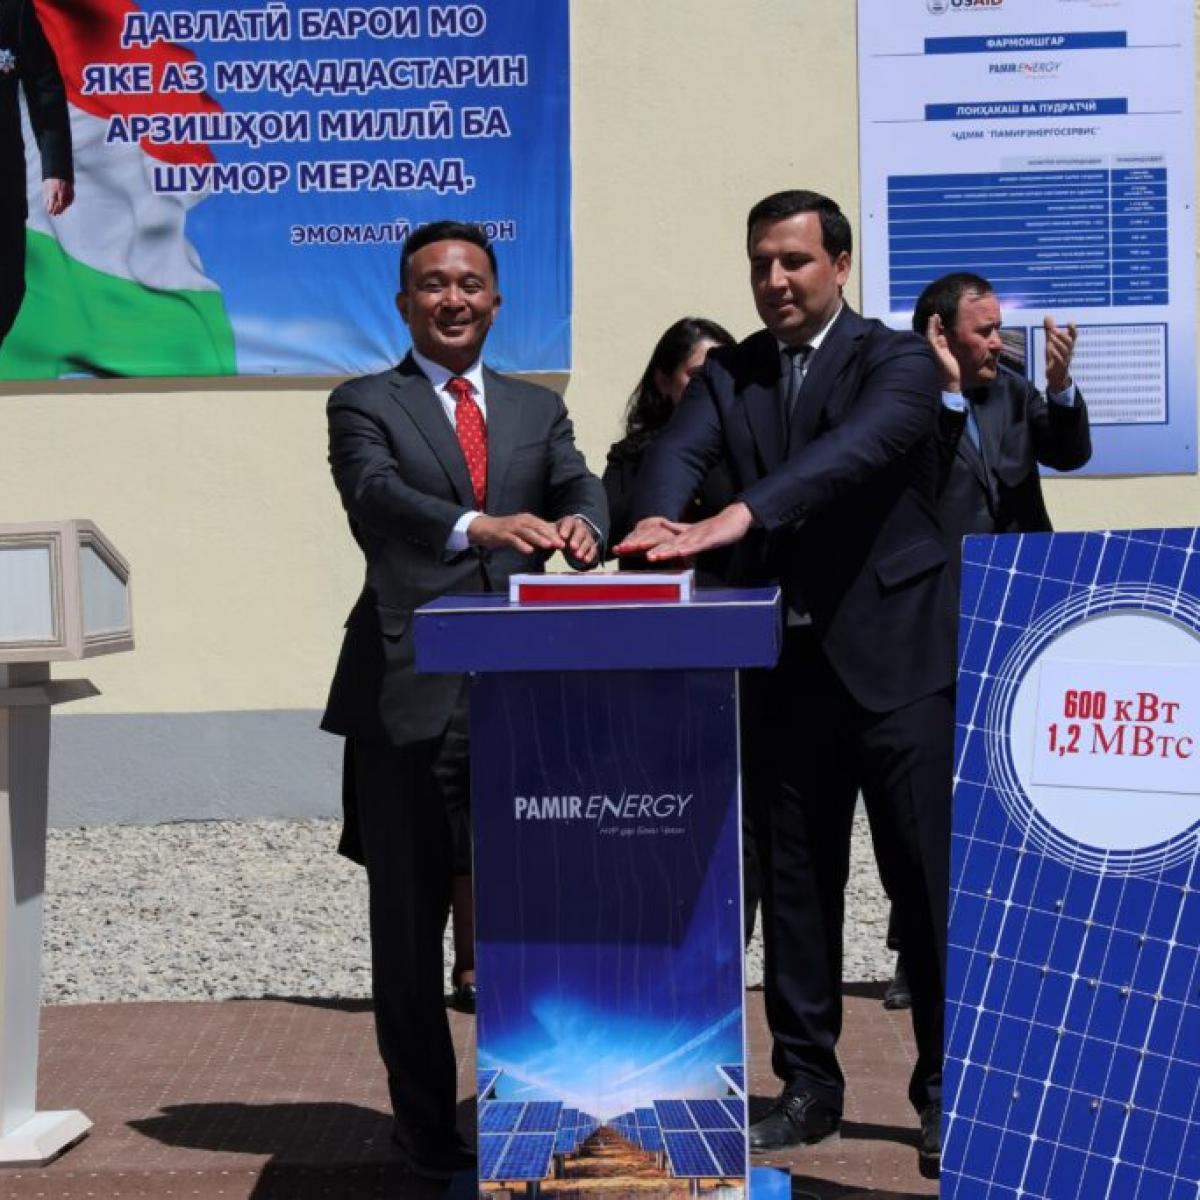 United States Government and Pamir Energy Company Are Electrifying Remote Villages in Tajikistan